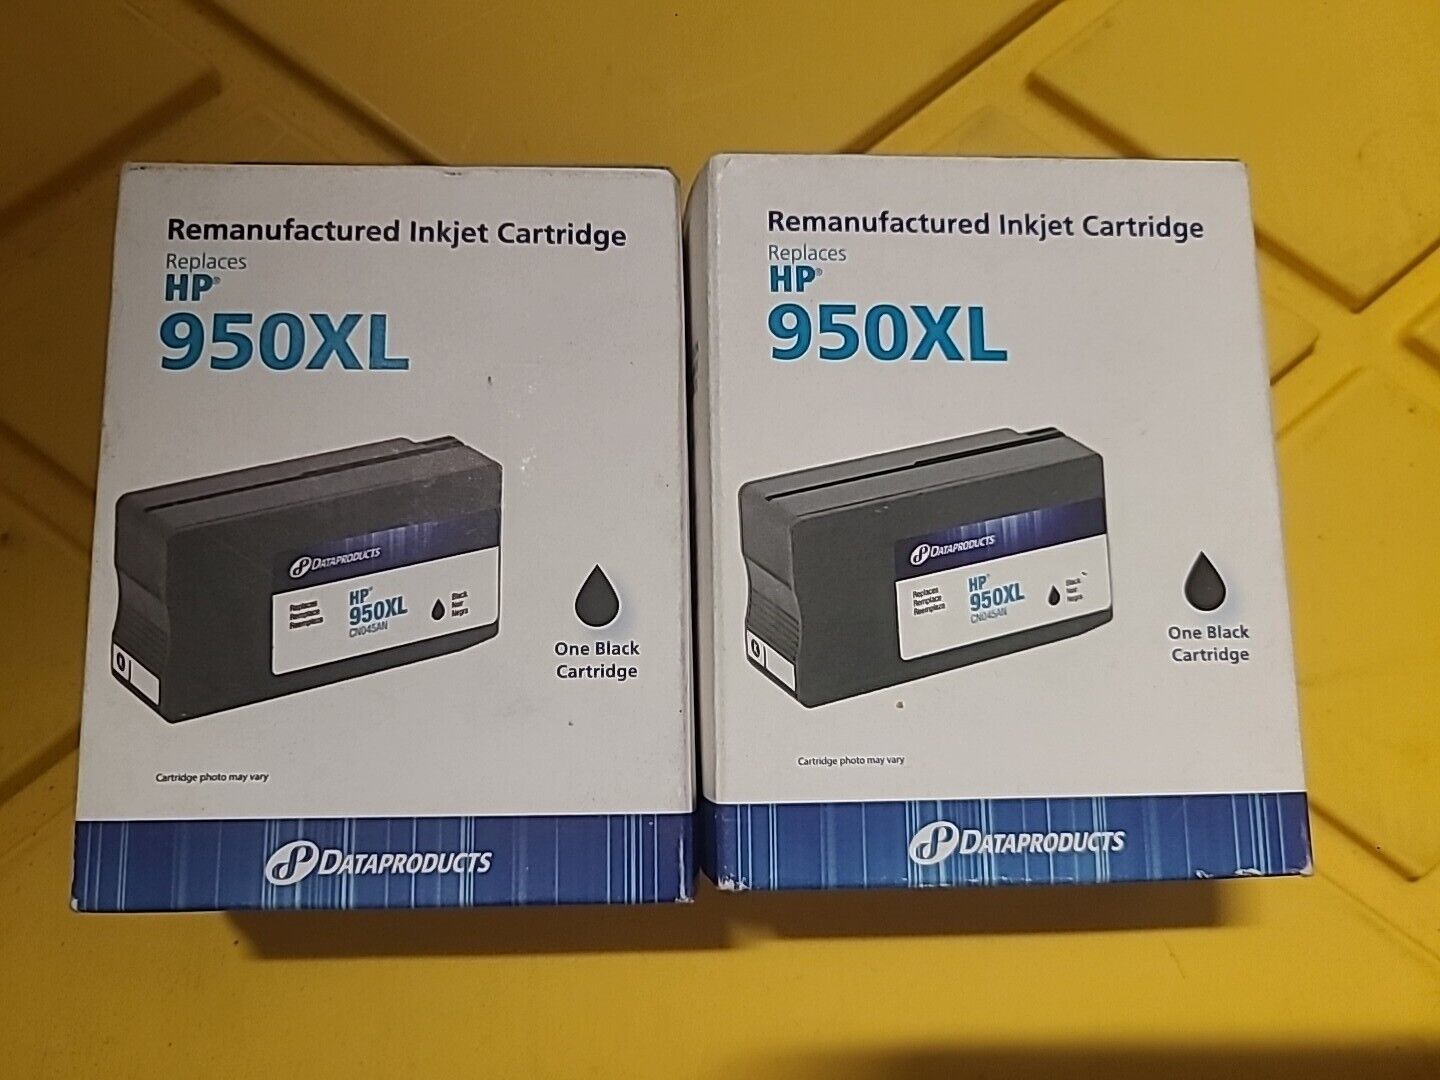 Lot Of 2 DataProducts Inkjet Cartridge Replaces HP 952XL Black